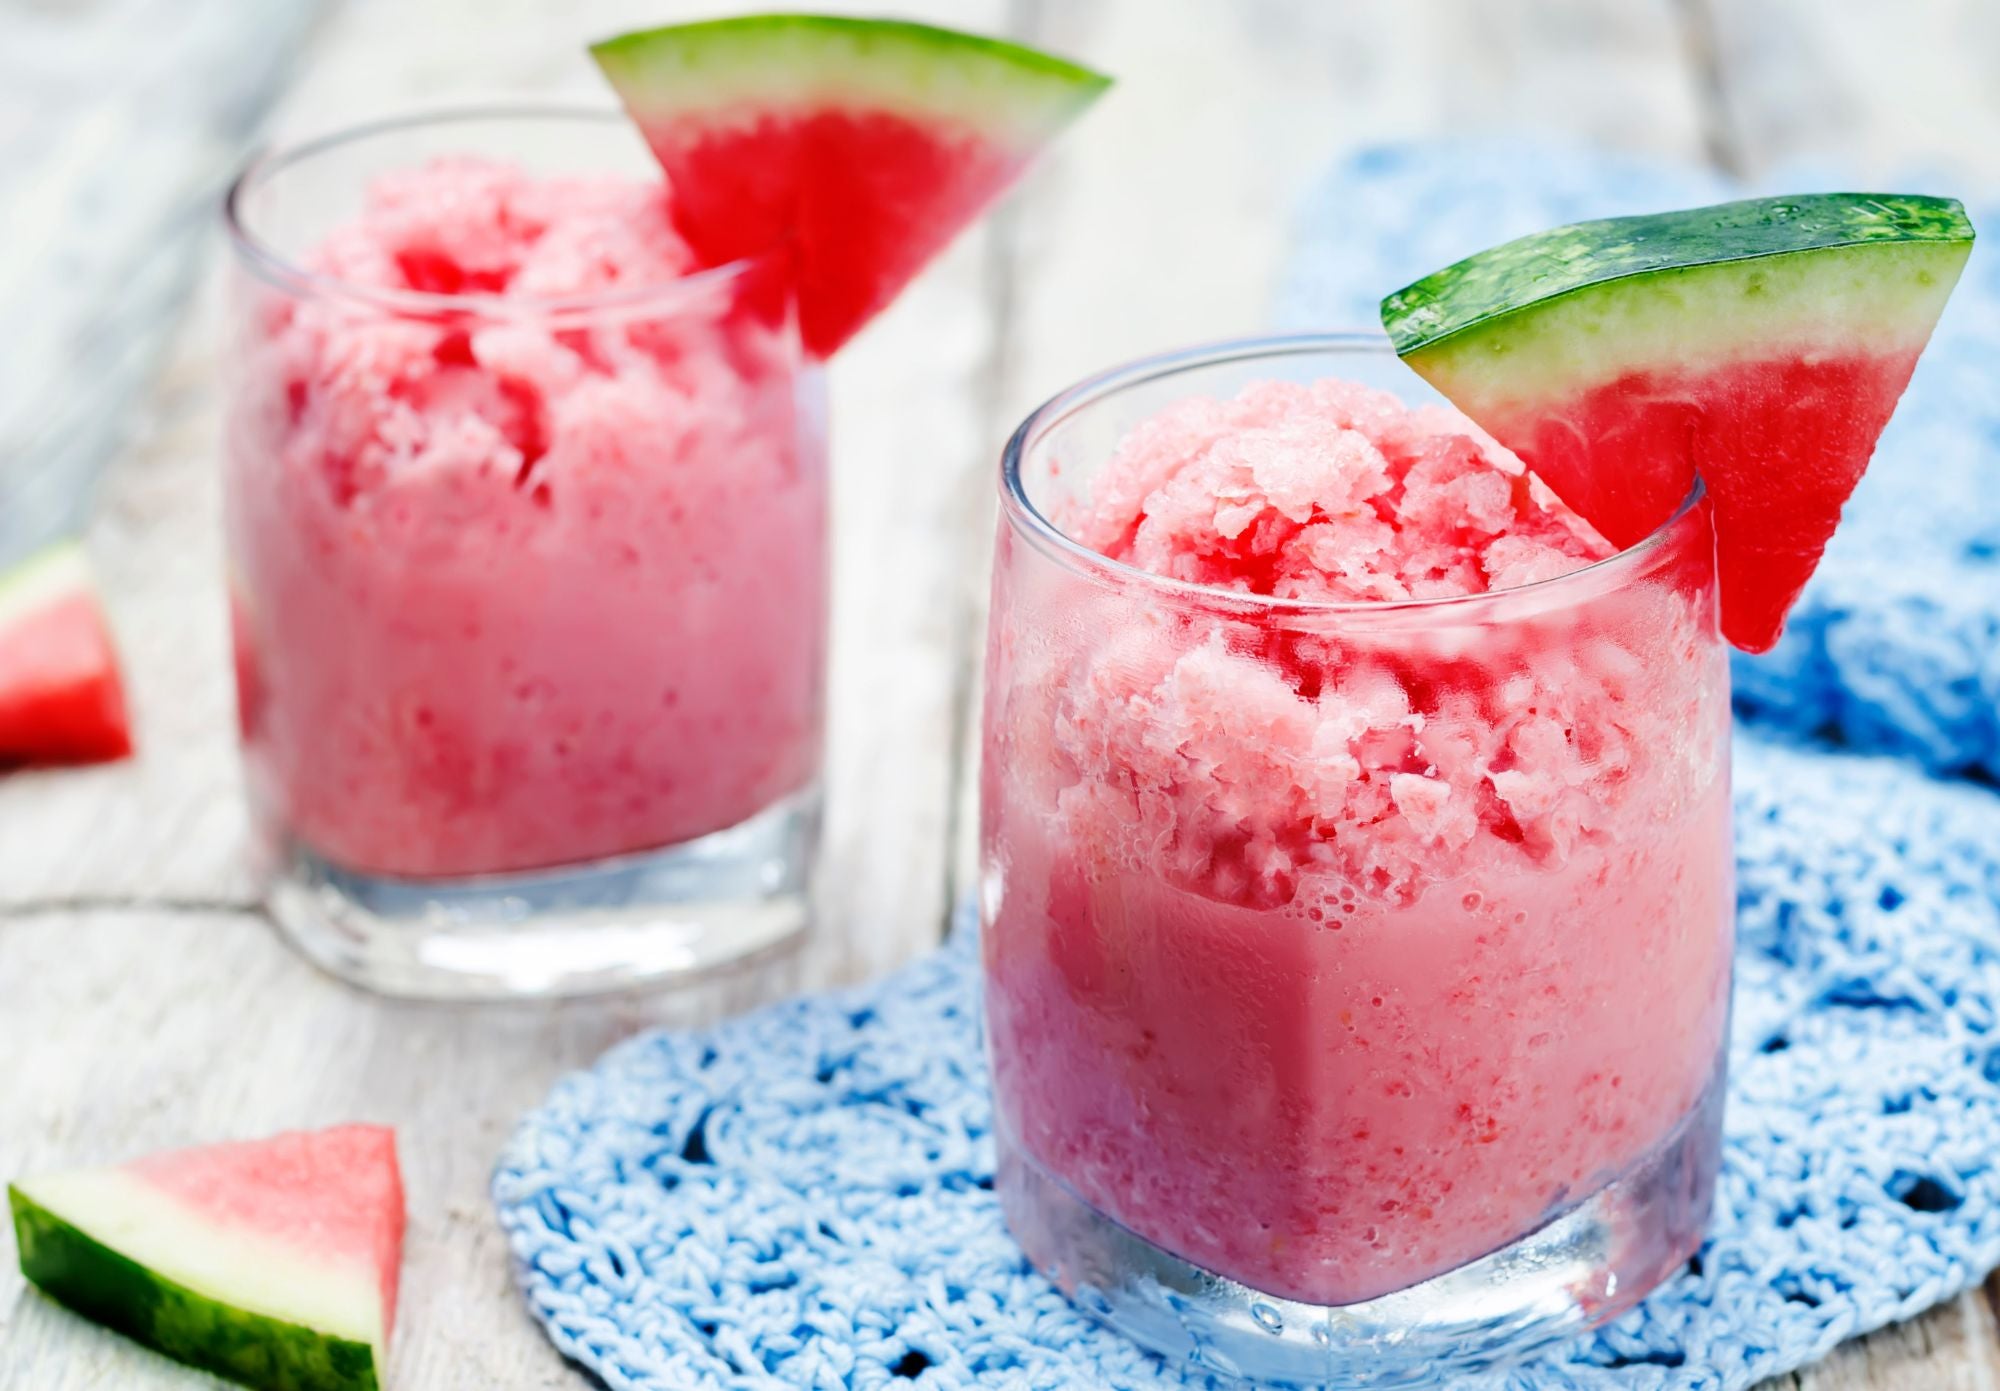 Beating the Heat: Healthy Frozen Treats to Enjoy in the Summer